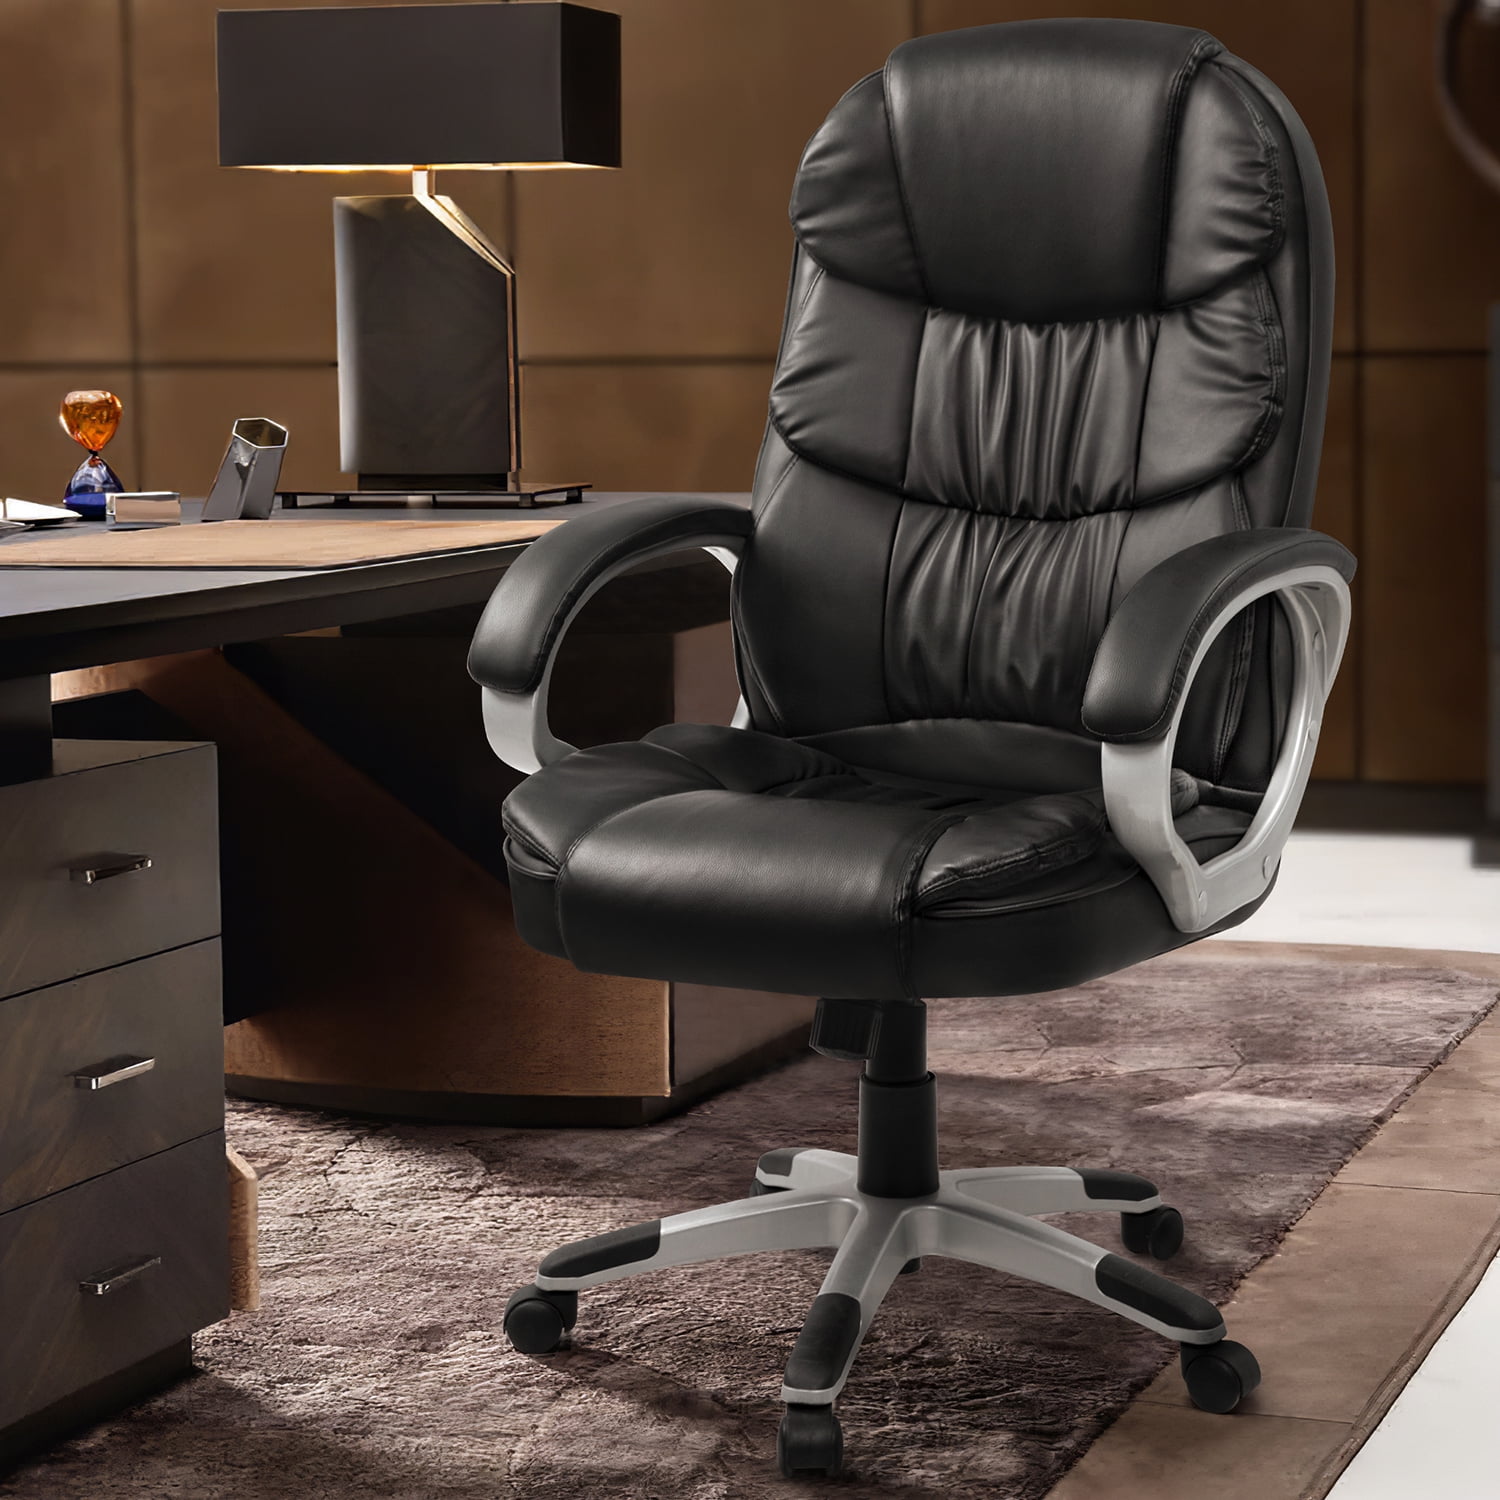 LACOO Black Big and High Back Office Chair, PU Leather Executive